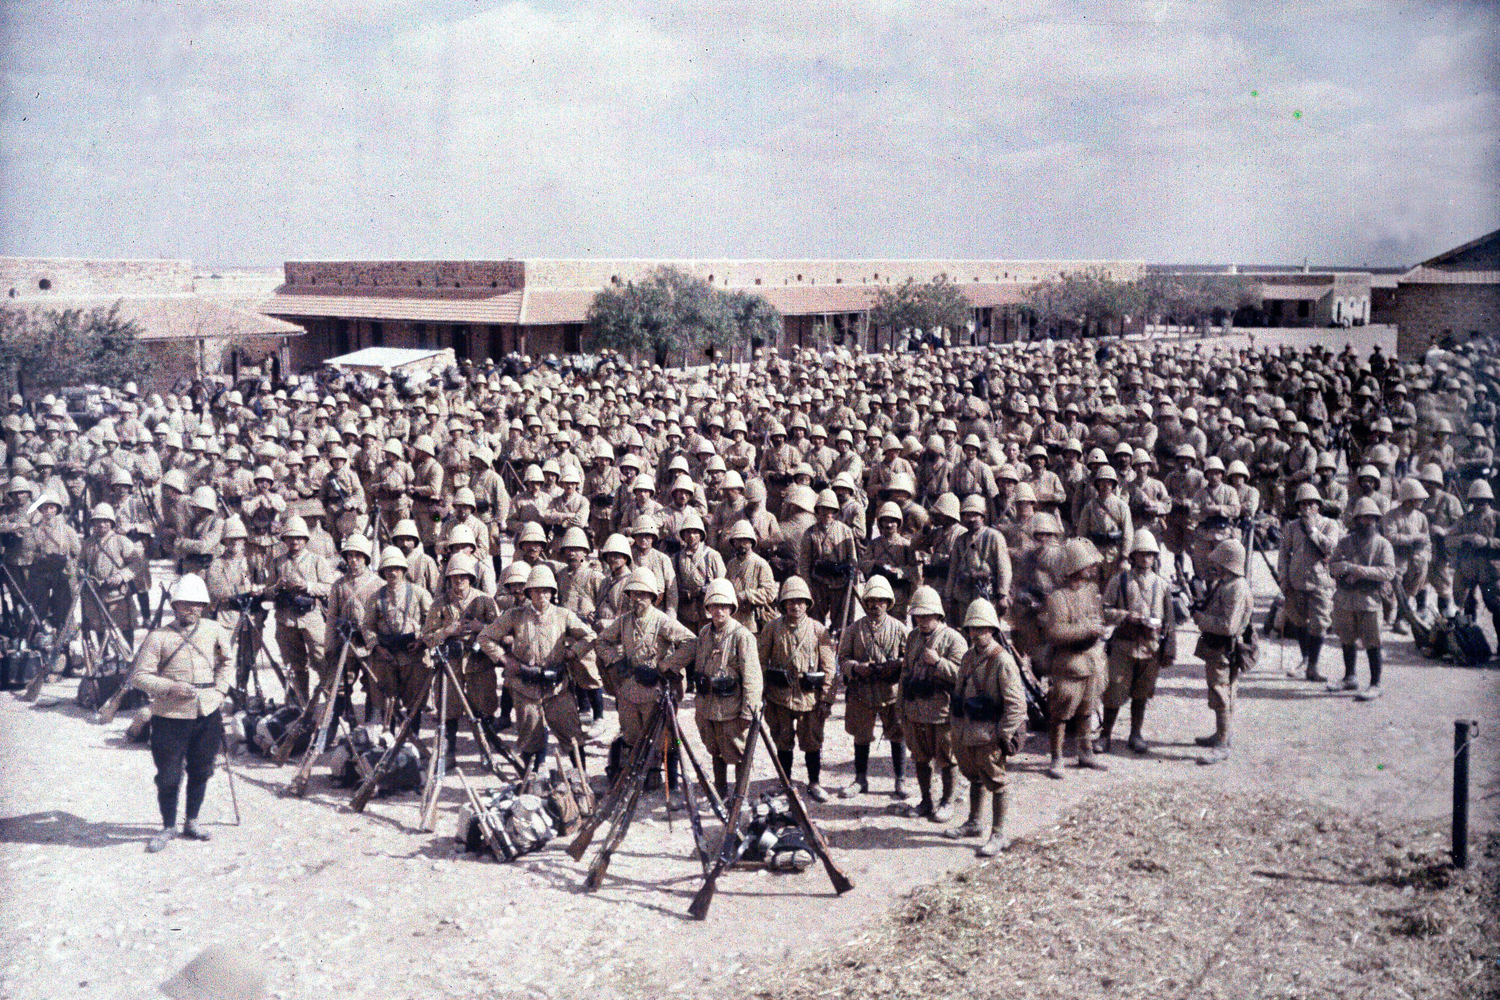 The return of a French column of Zouaves - light infantry regiments - from the border with Tripolitaine, at the garrison Medenine, in southern Tunisia, March 20, 1916.